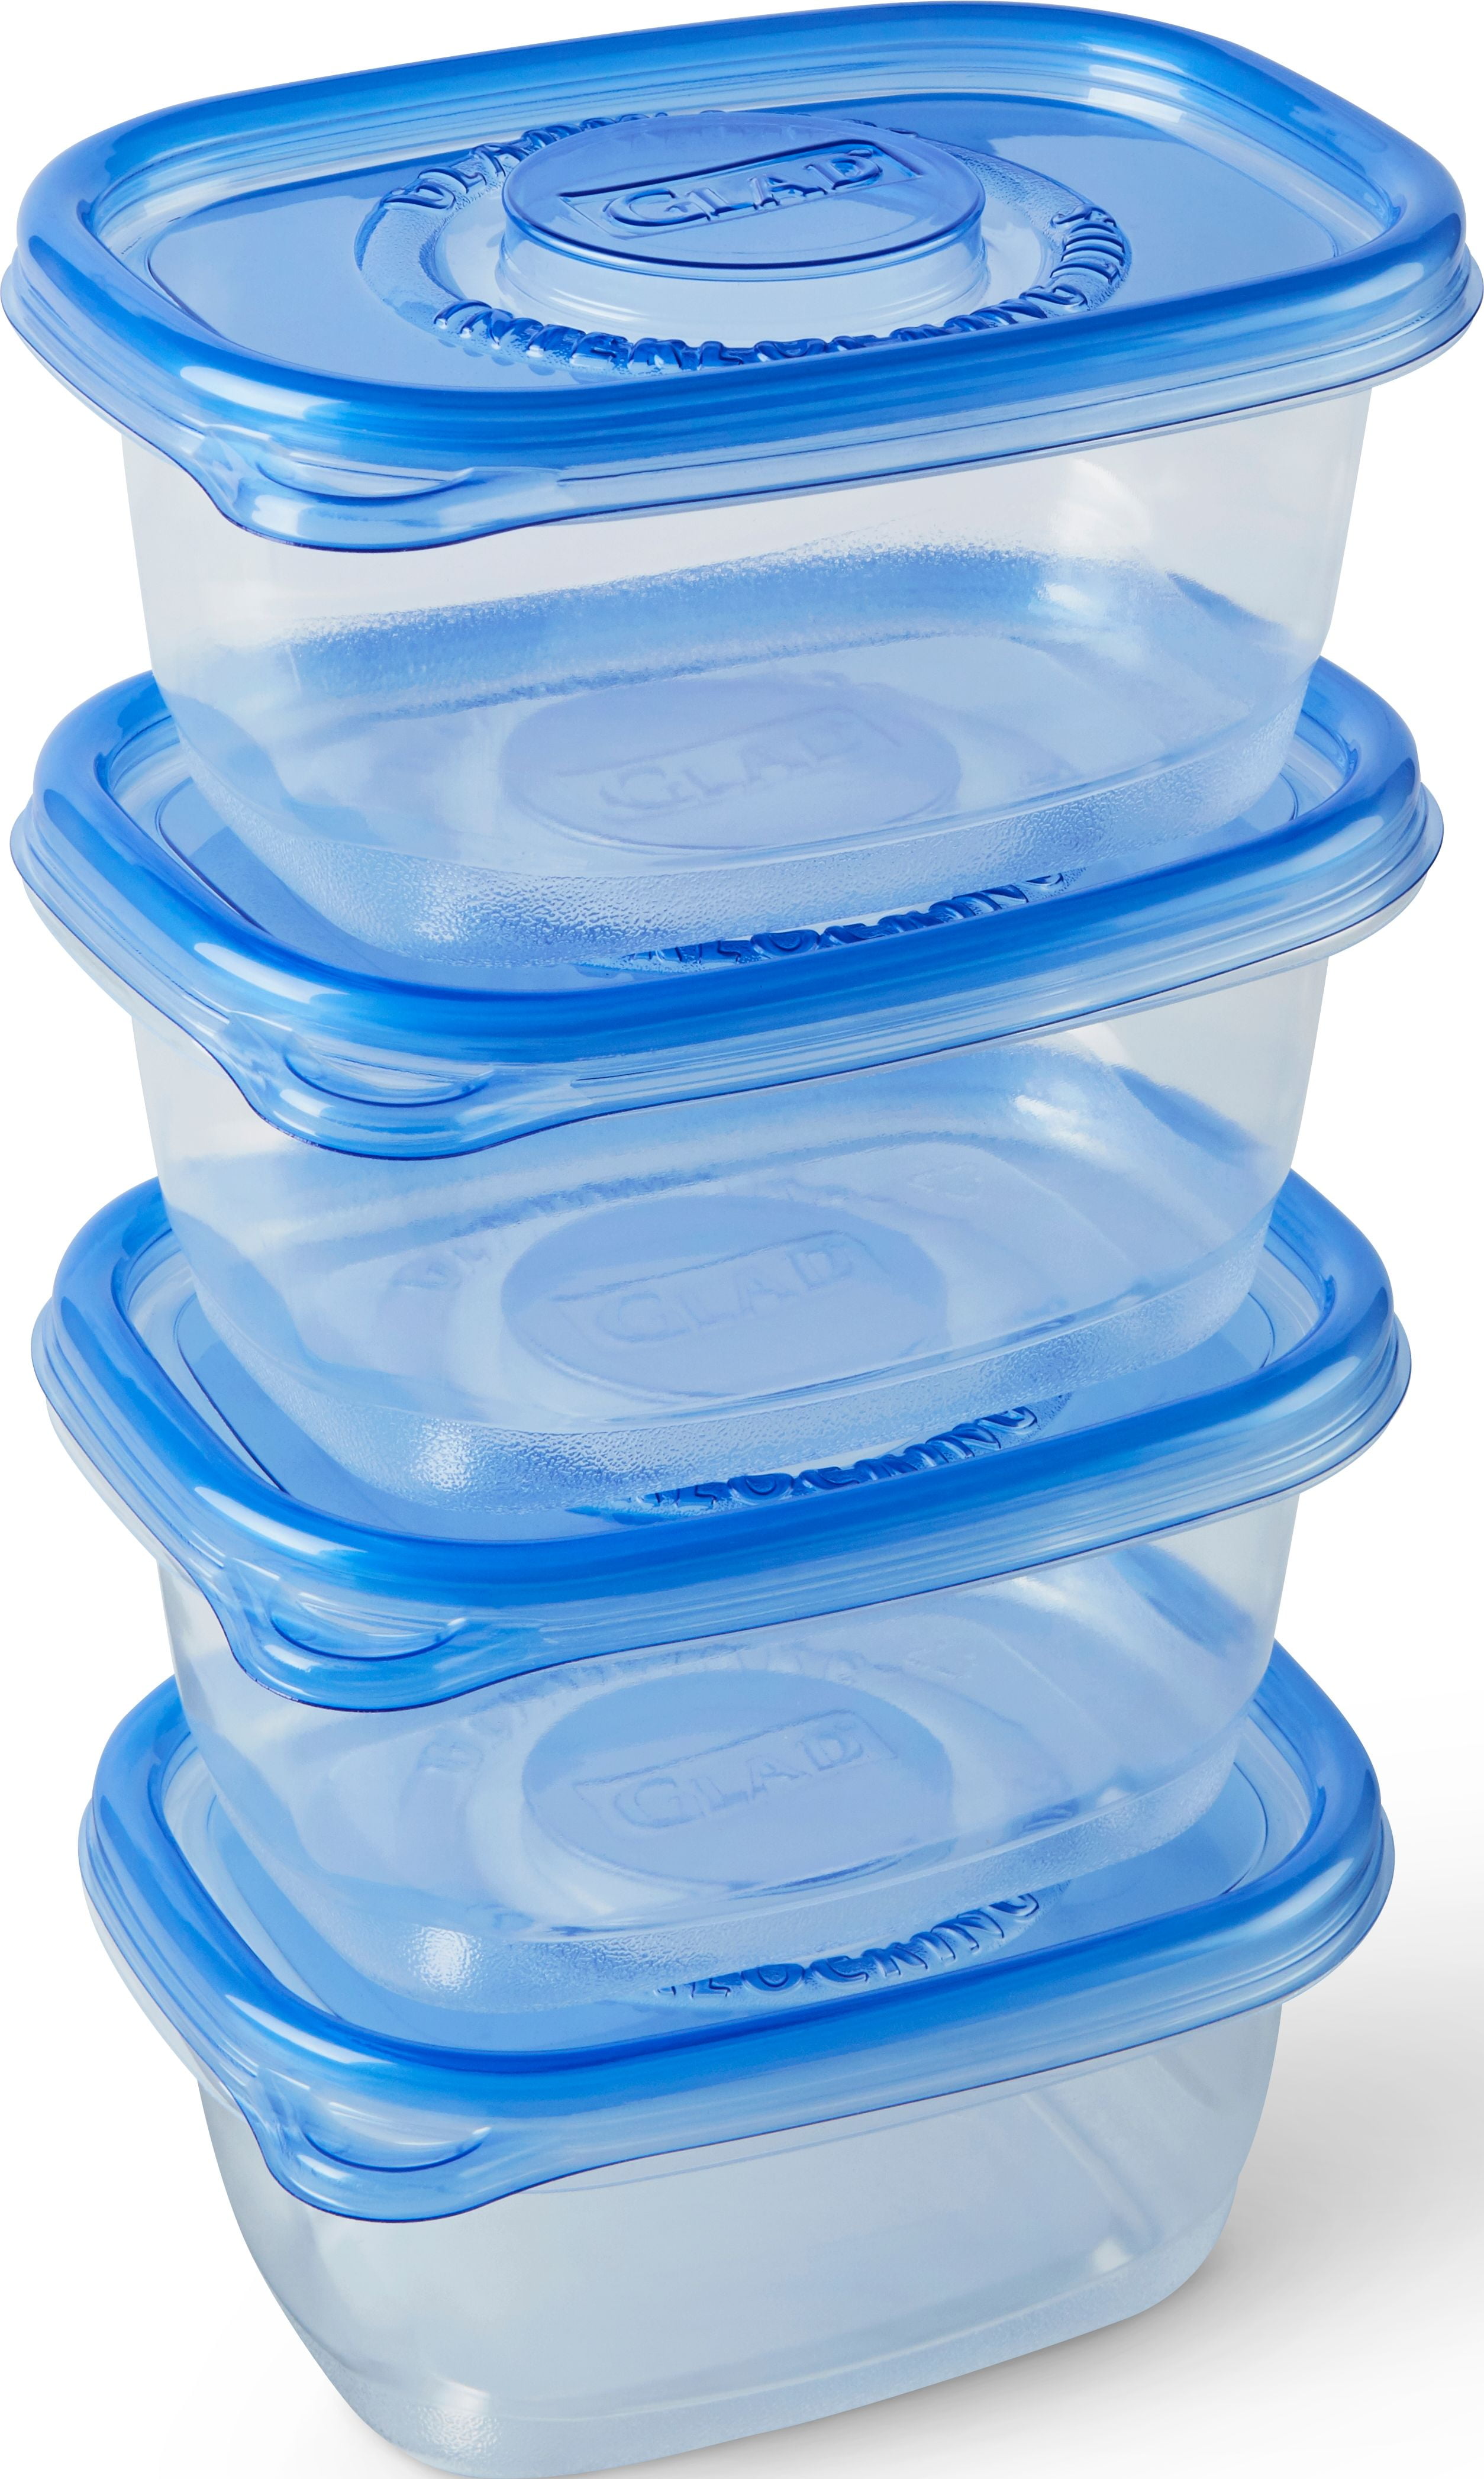 24 Glad To Go Medium Food Storage Containers For Just $11.17 From